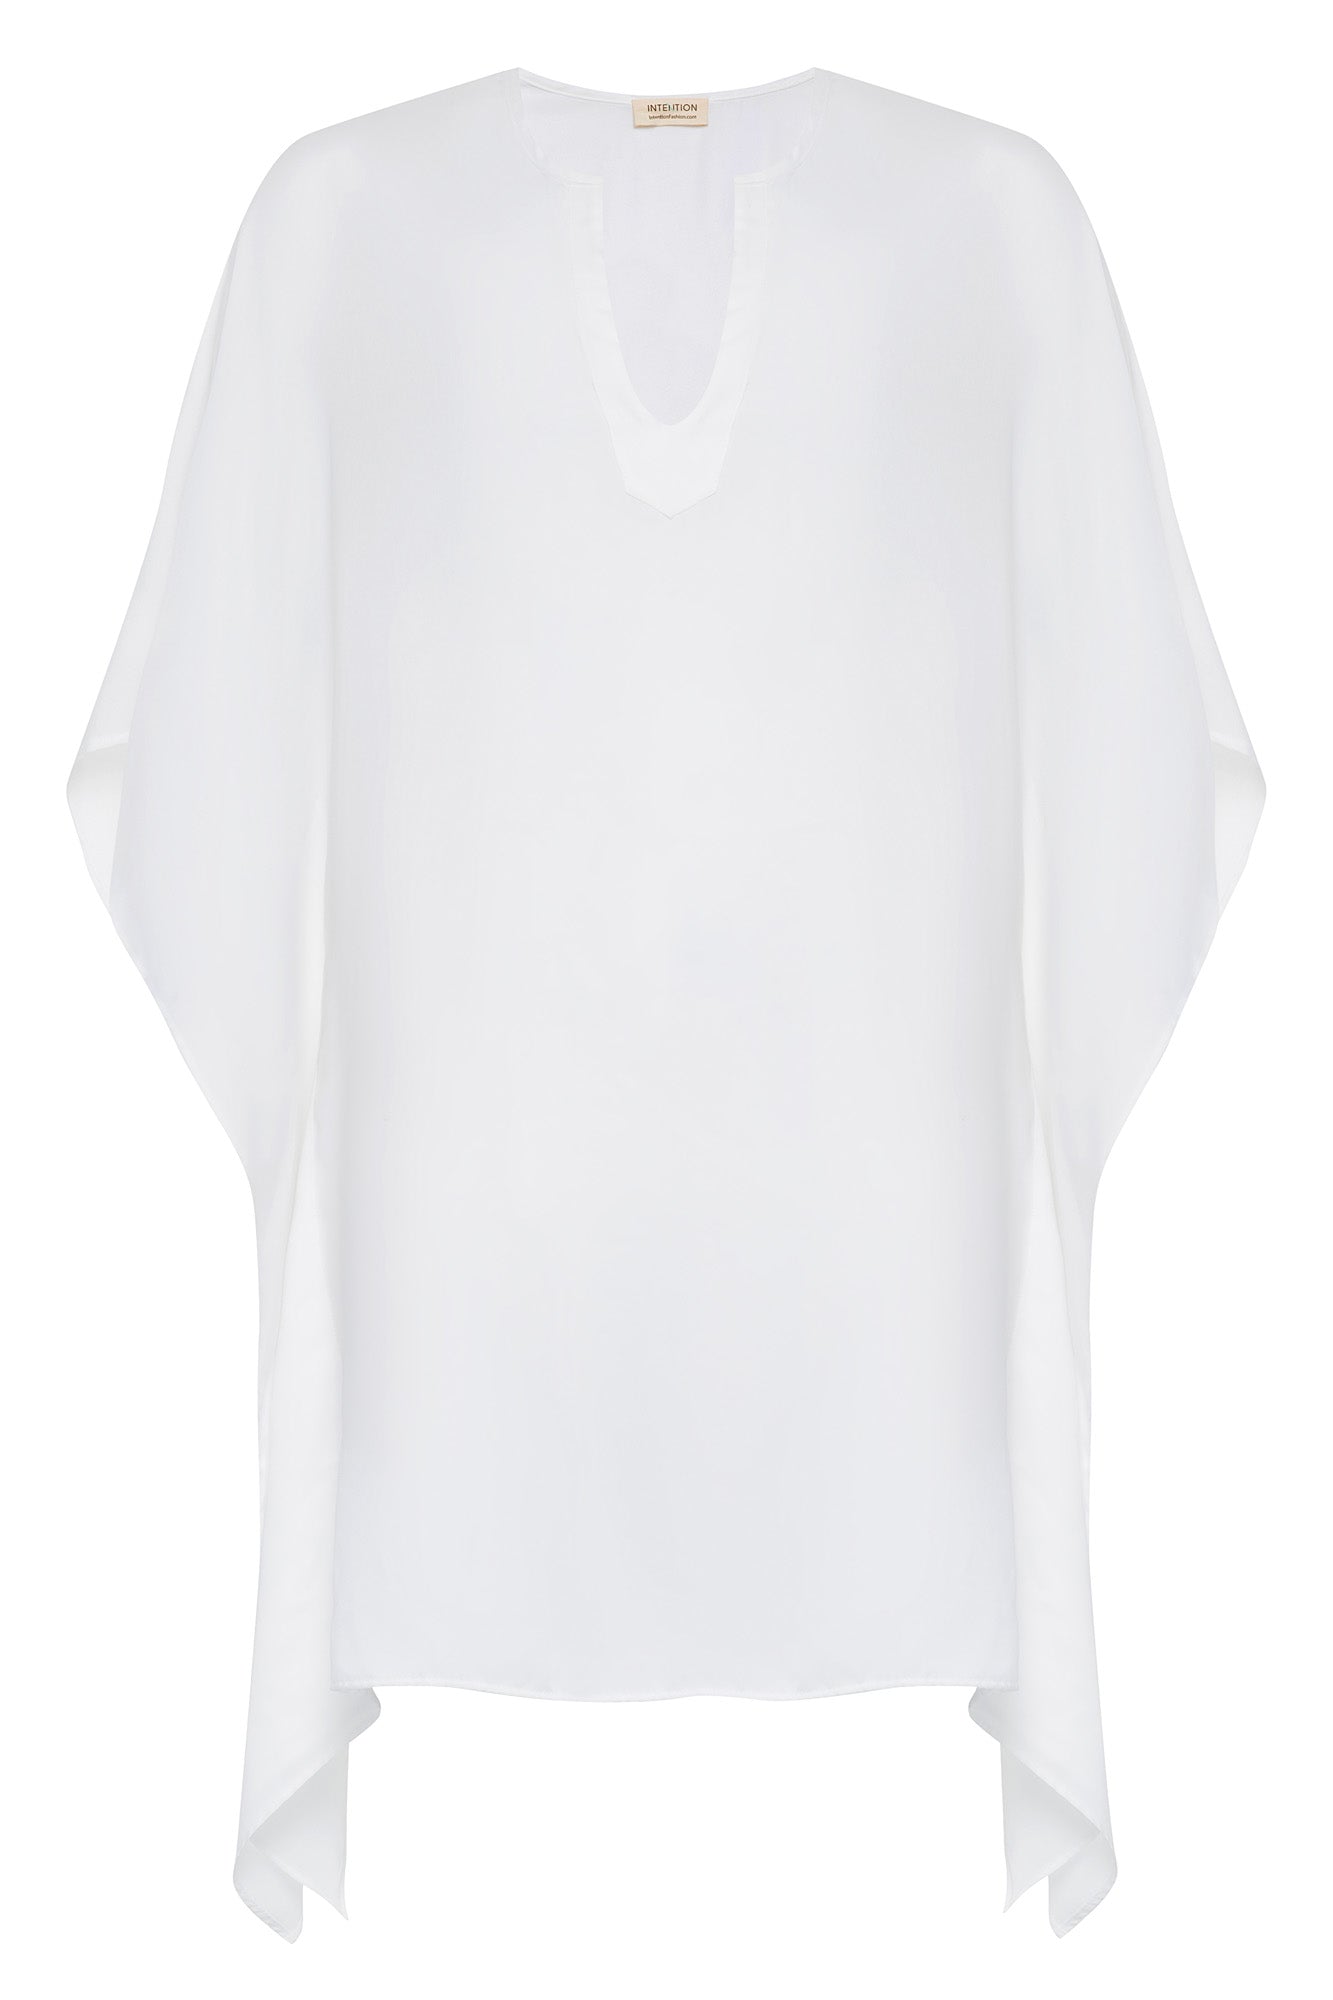 printed/embroidered White tunic tops and casual wear shirts